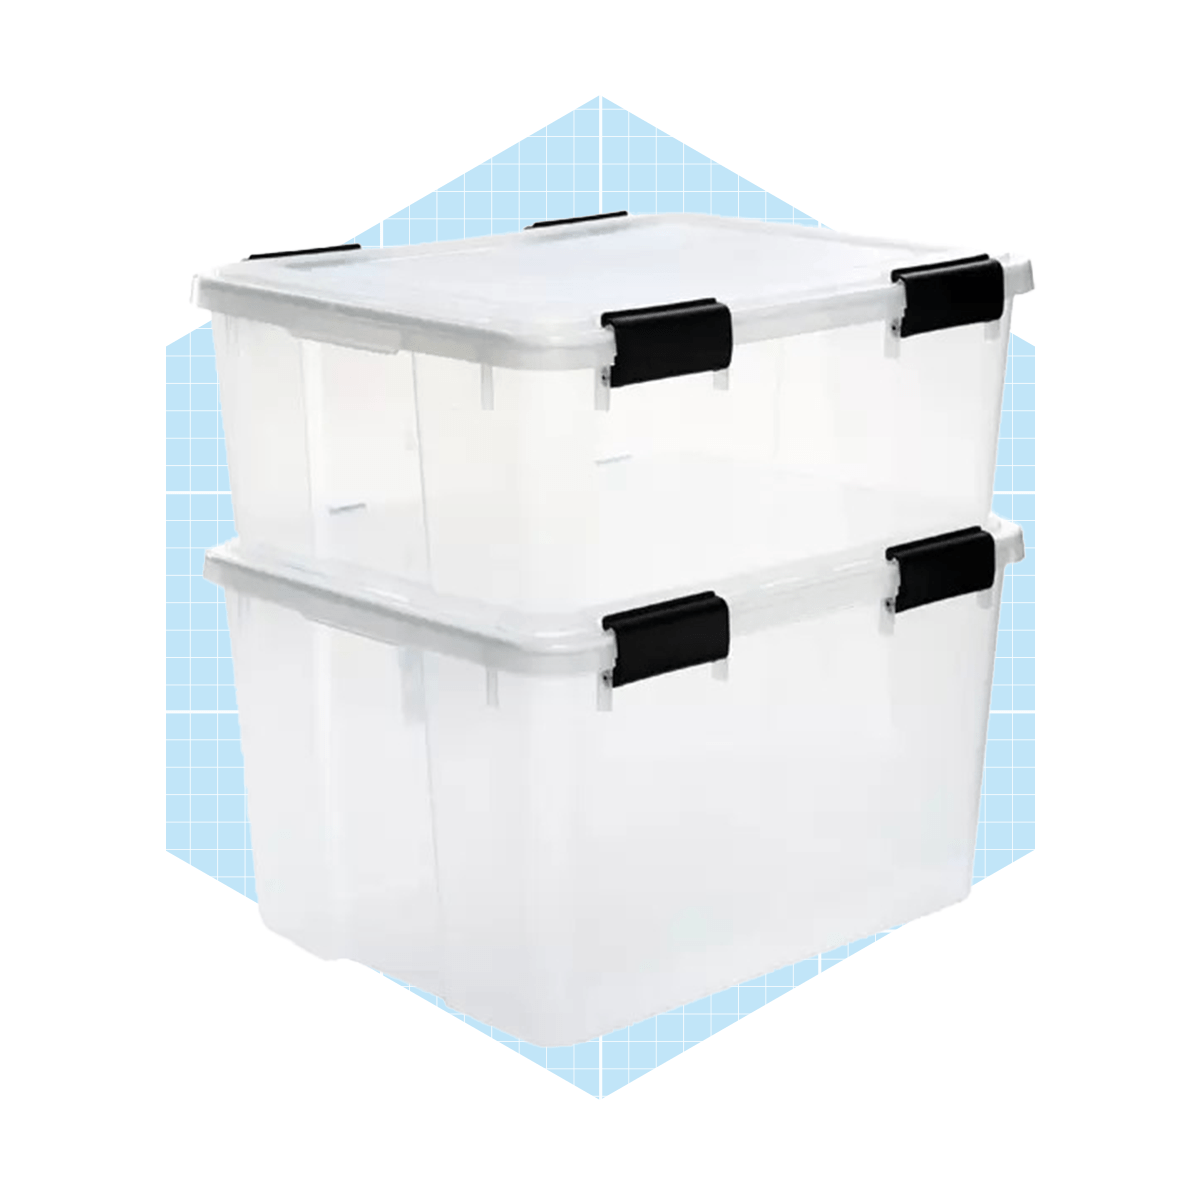 https://www.familyhandyman.com/wp-content/uploads/2022/12/clear-weathertight-totes-ecomm-via-containerstore.com_.png?fit=700%2C700